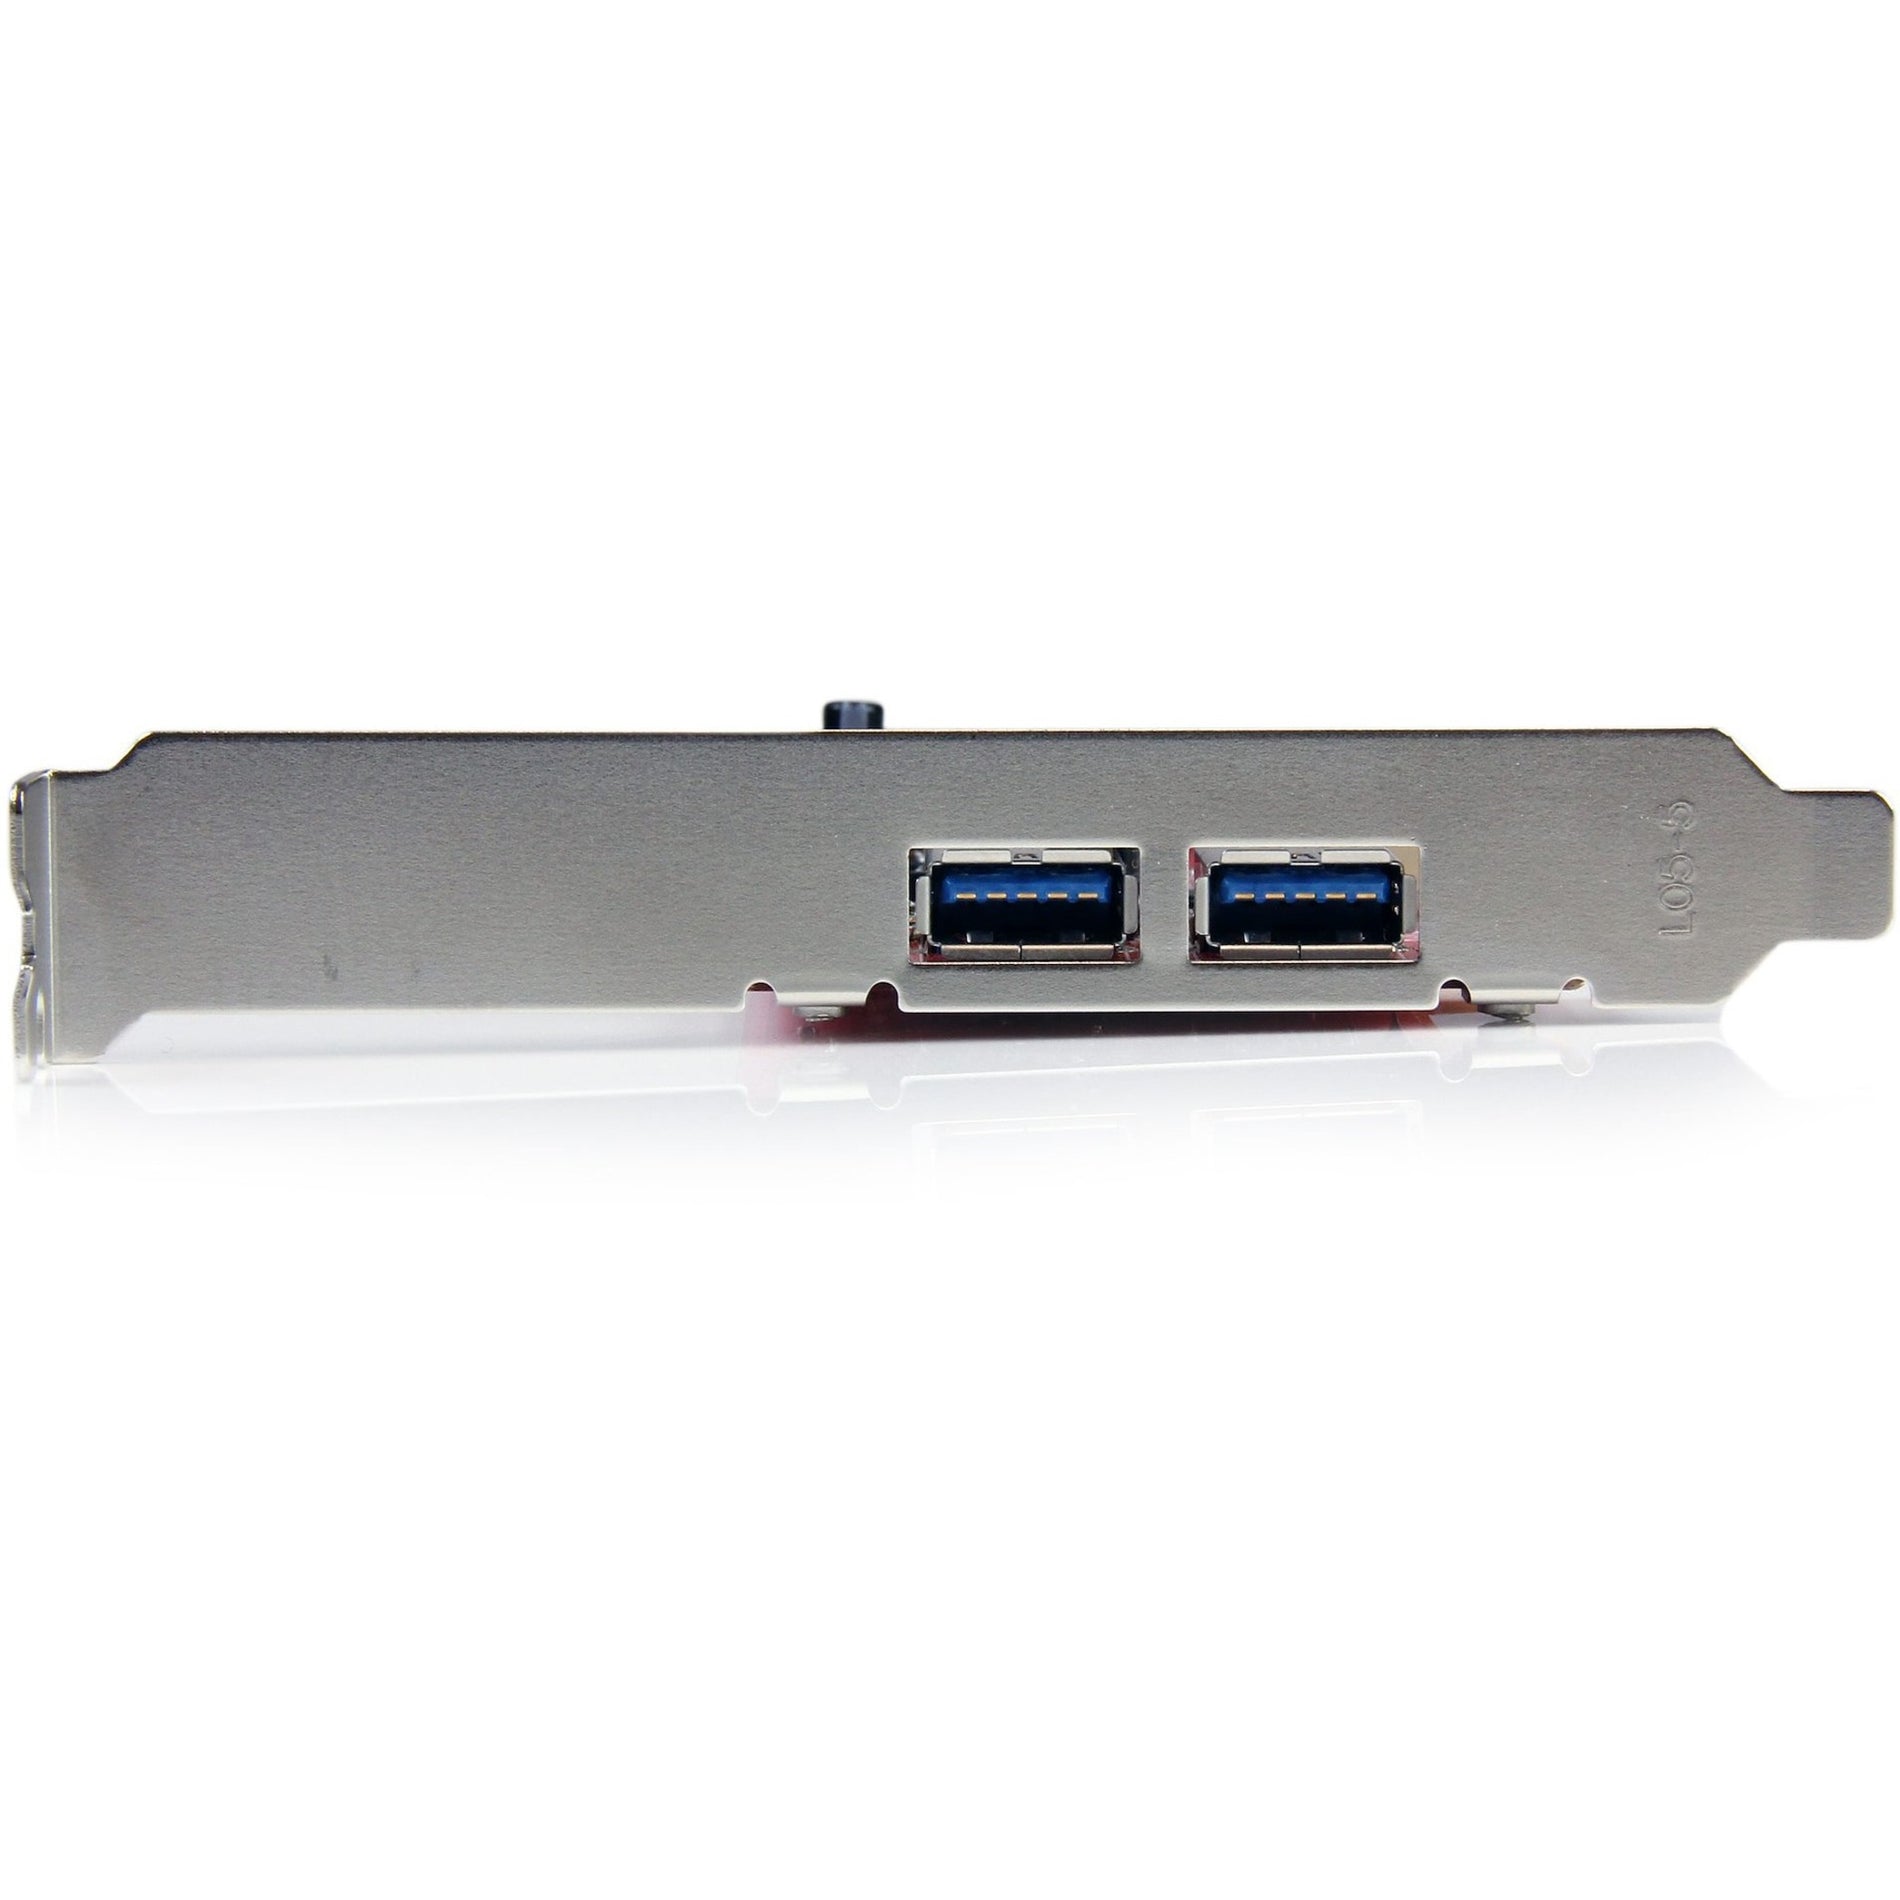 StarTech.com PCIUSB3S22 2 Port PCI SuperSpeed USB 3.0 Adapter Card with SATA Power, High-Speed Data Transfer and Easy Installation